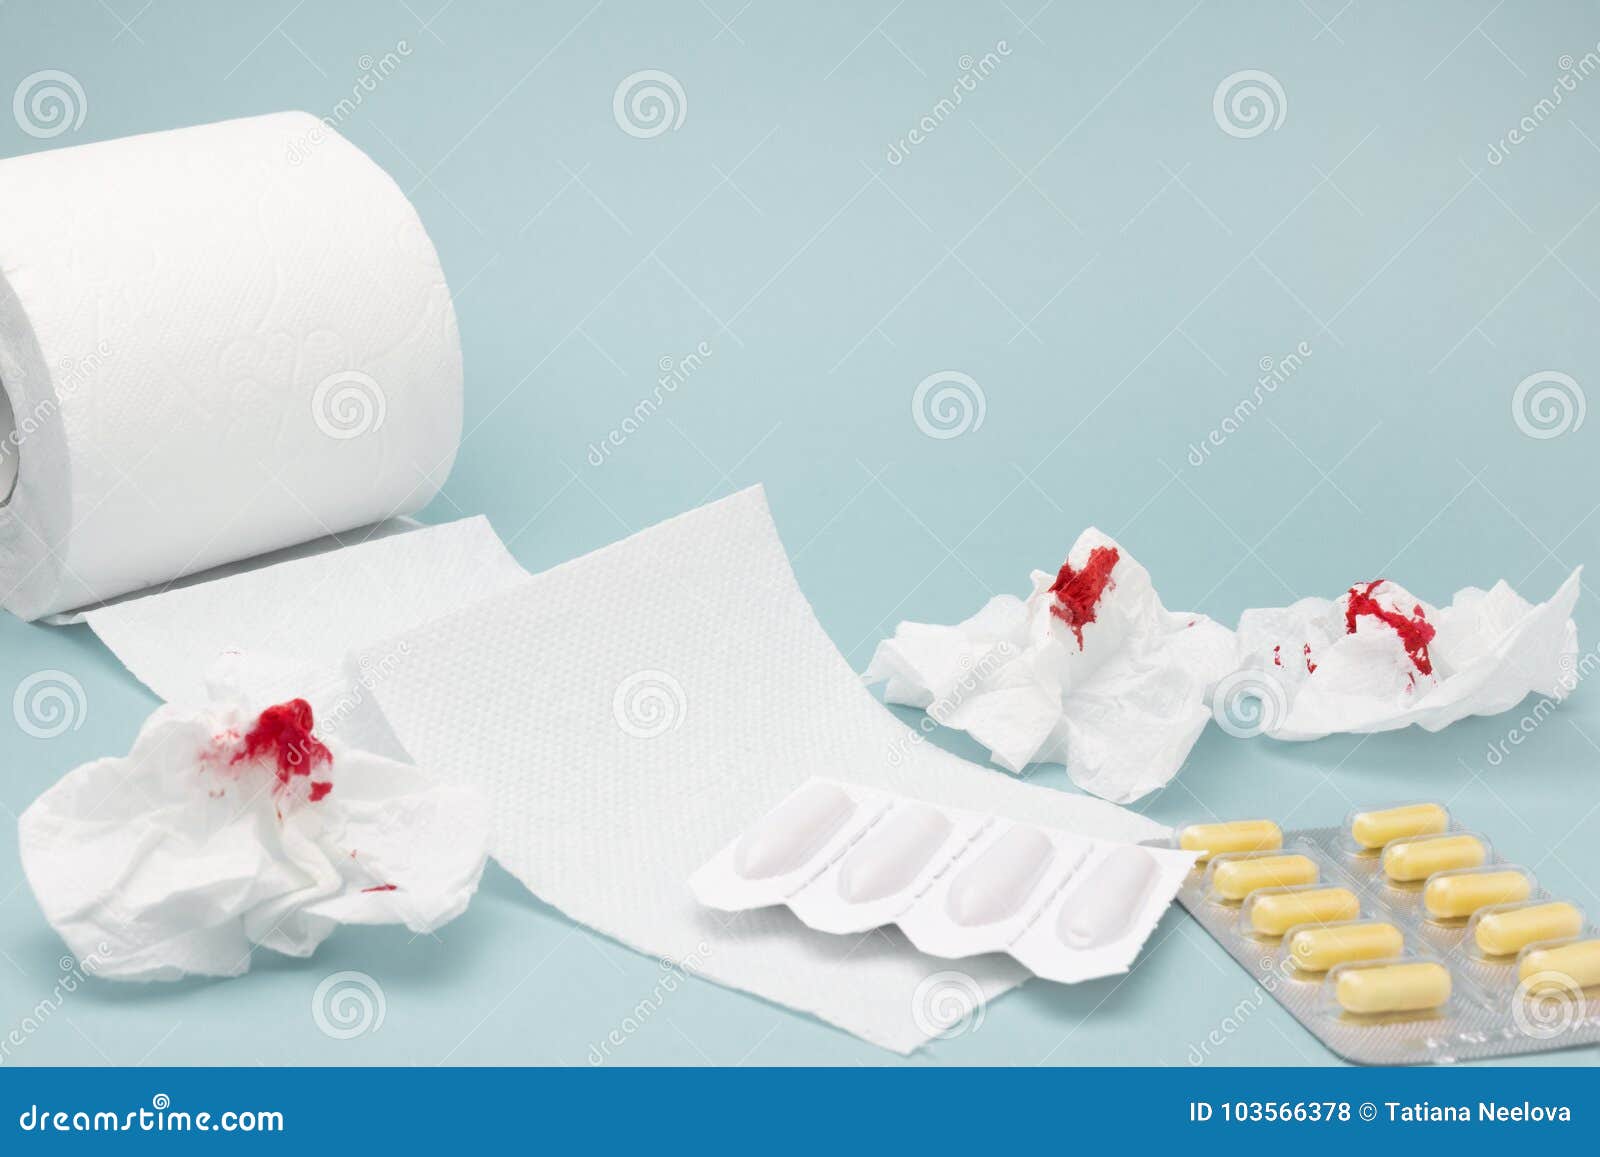 A Photo Of Pills Used Bloody Toilet Paper Sheets Rectal Candles And A